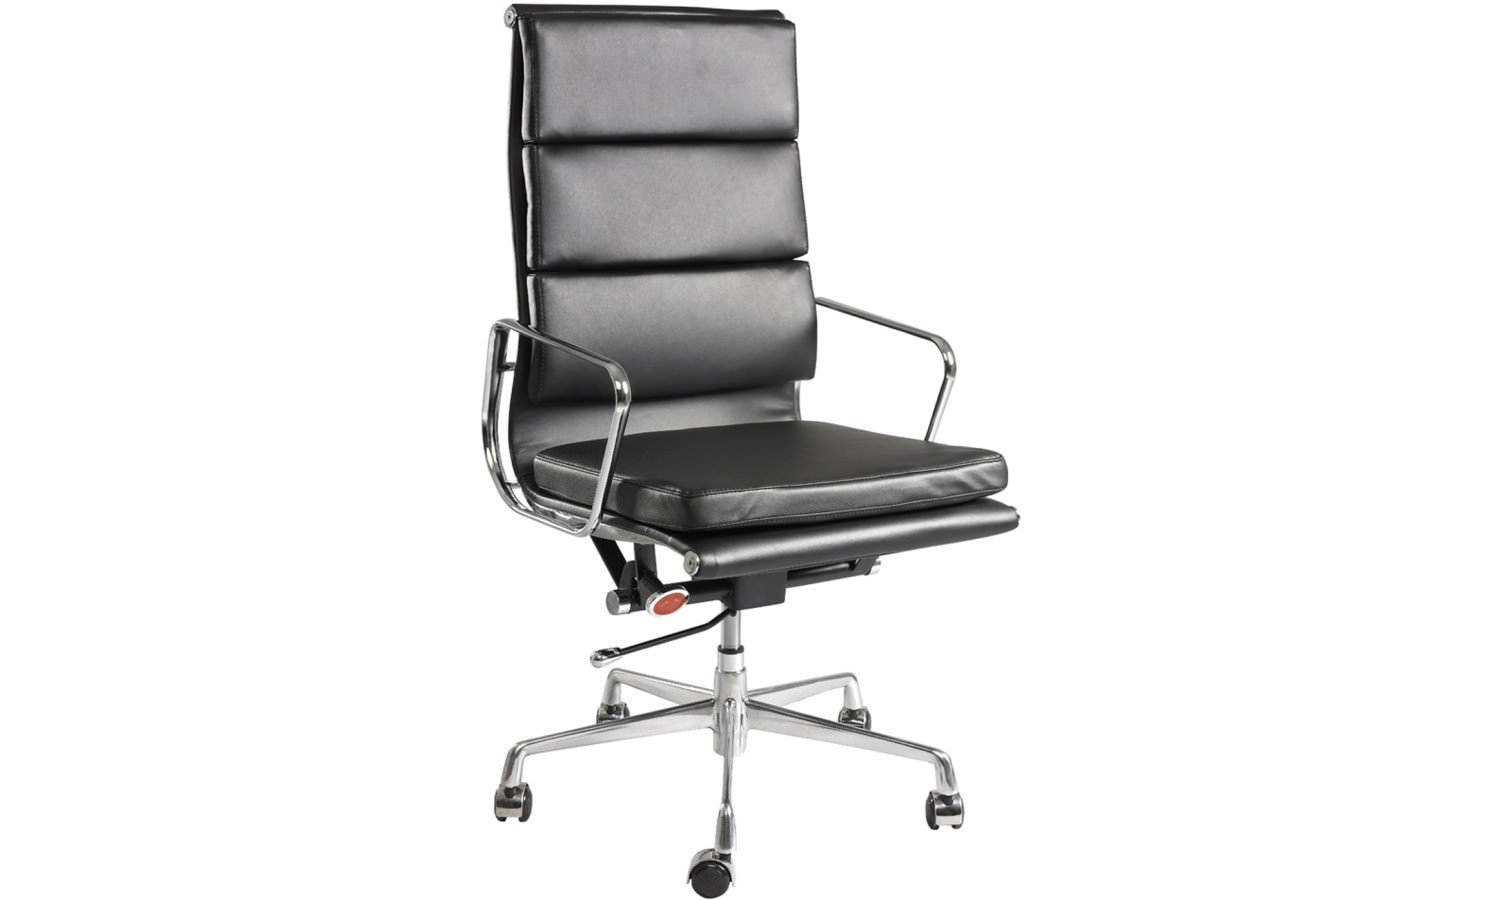 Eames Reproduction Manager Office Chair - High Padded Black Back Jasonl black 